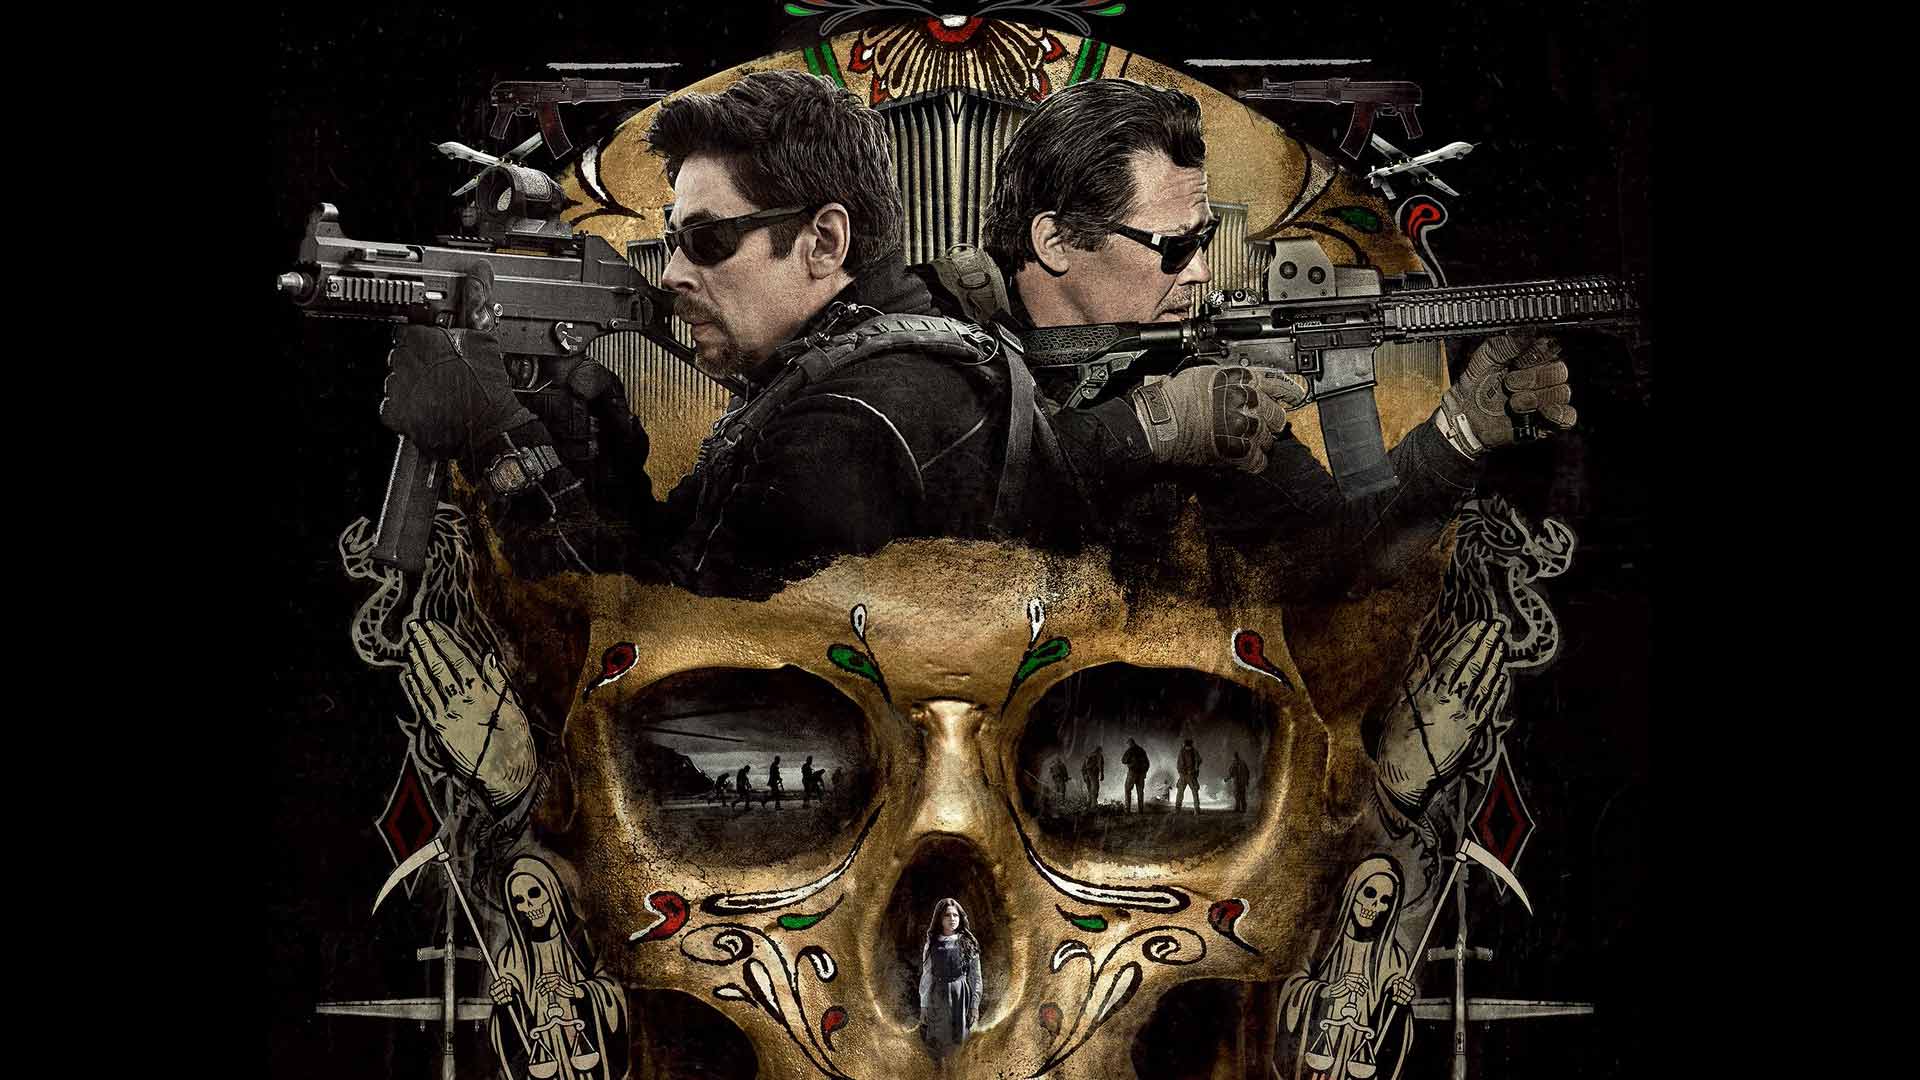 Sicario Day Of The Soldado Official Poster Wallpapers